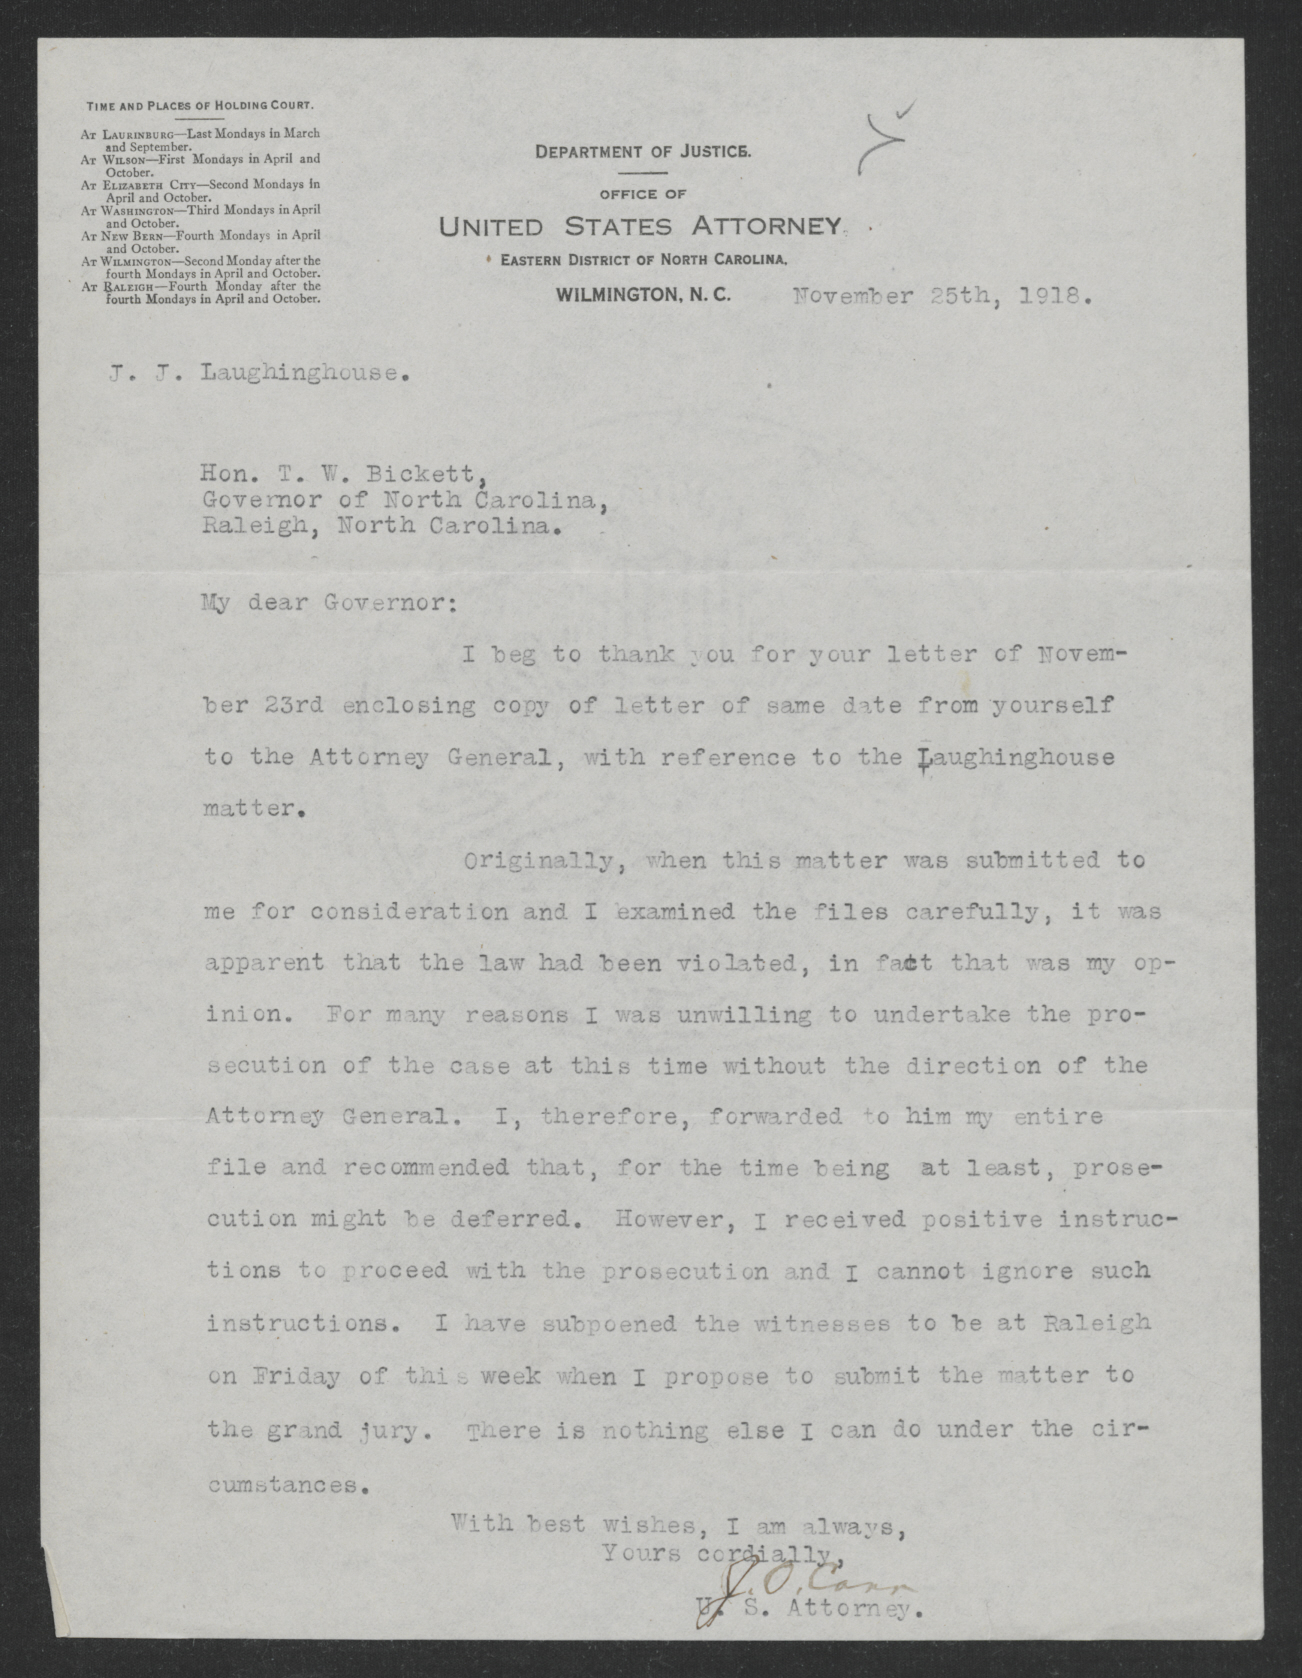 Letter from James O. Carr to Thomas W. Bickett, November 25, 1918